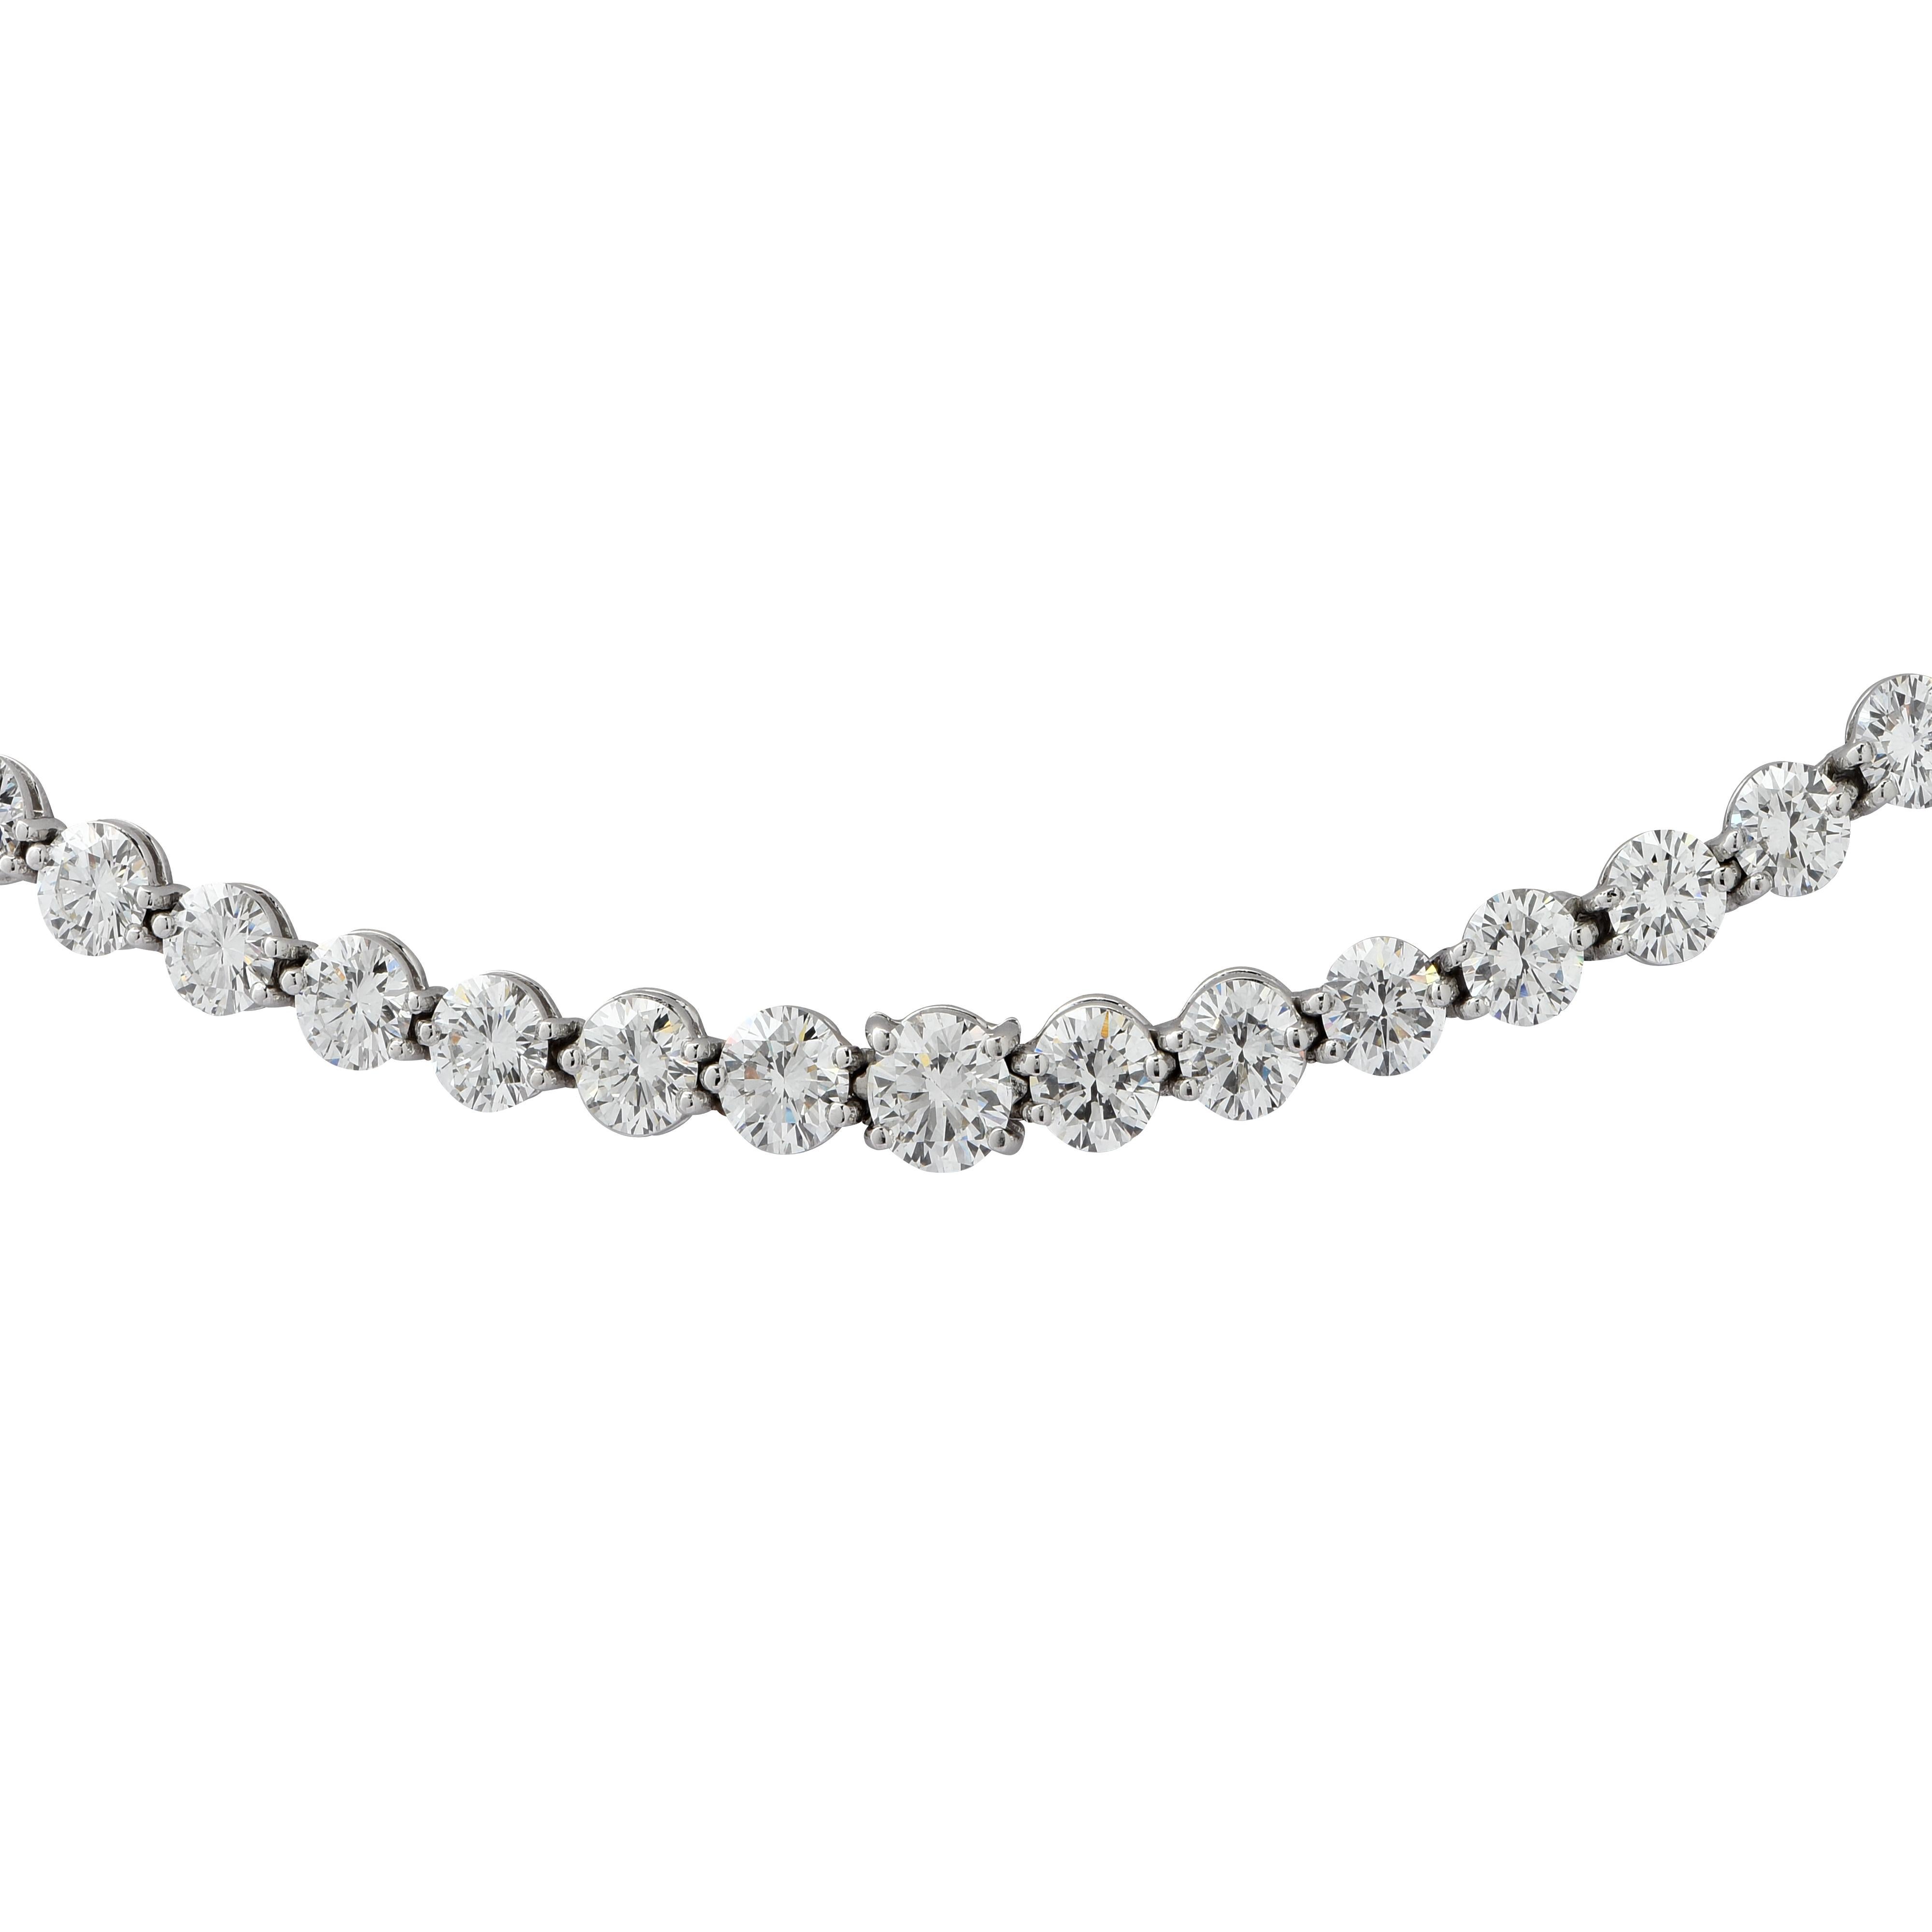 Distinctive Tiffany & Co. diamond rivera necklace featuring 99 round brilliant cut diamonds and 4 marquis cut diamonds weighing 17.77 carats total, D-G color, VVS1-VS2 clarity. This stunning necklace measures 16.5 inches in length. Recently serviced